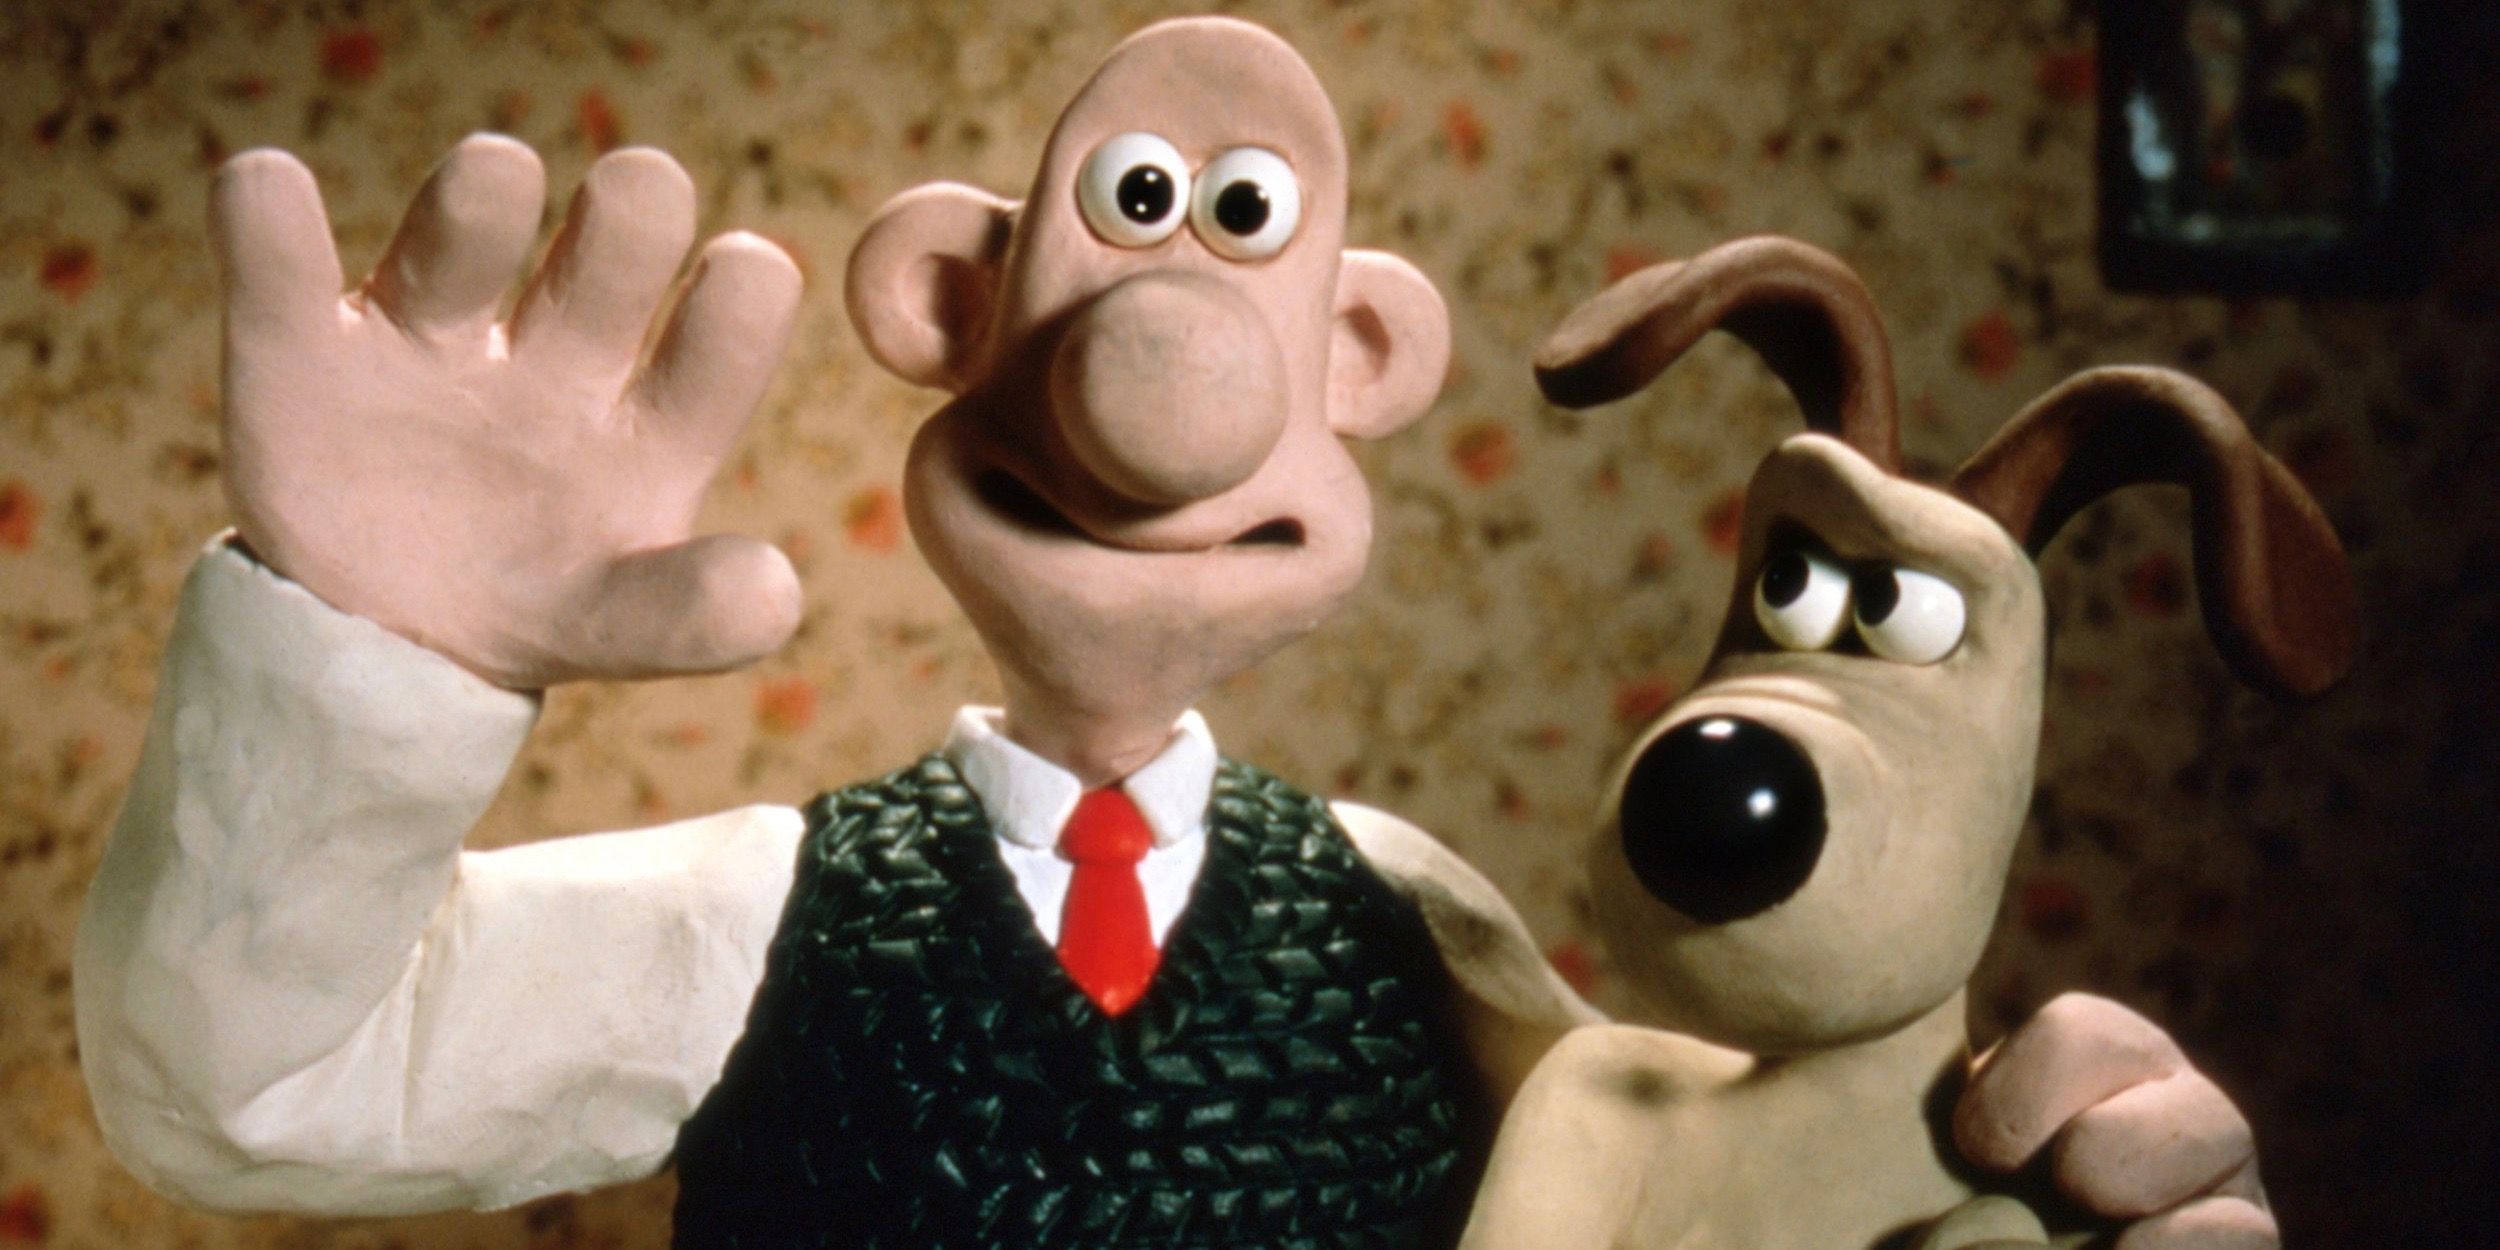 Wallace & Gromit: 10 Things You Probably Didn’t Know (30 Cracking Years)